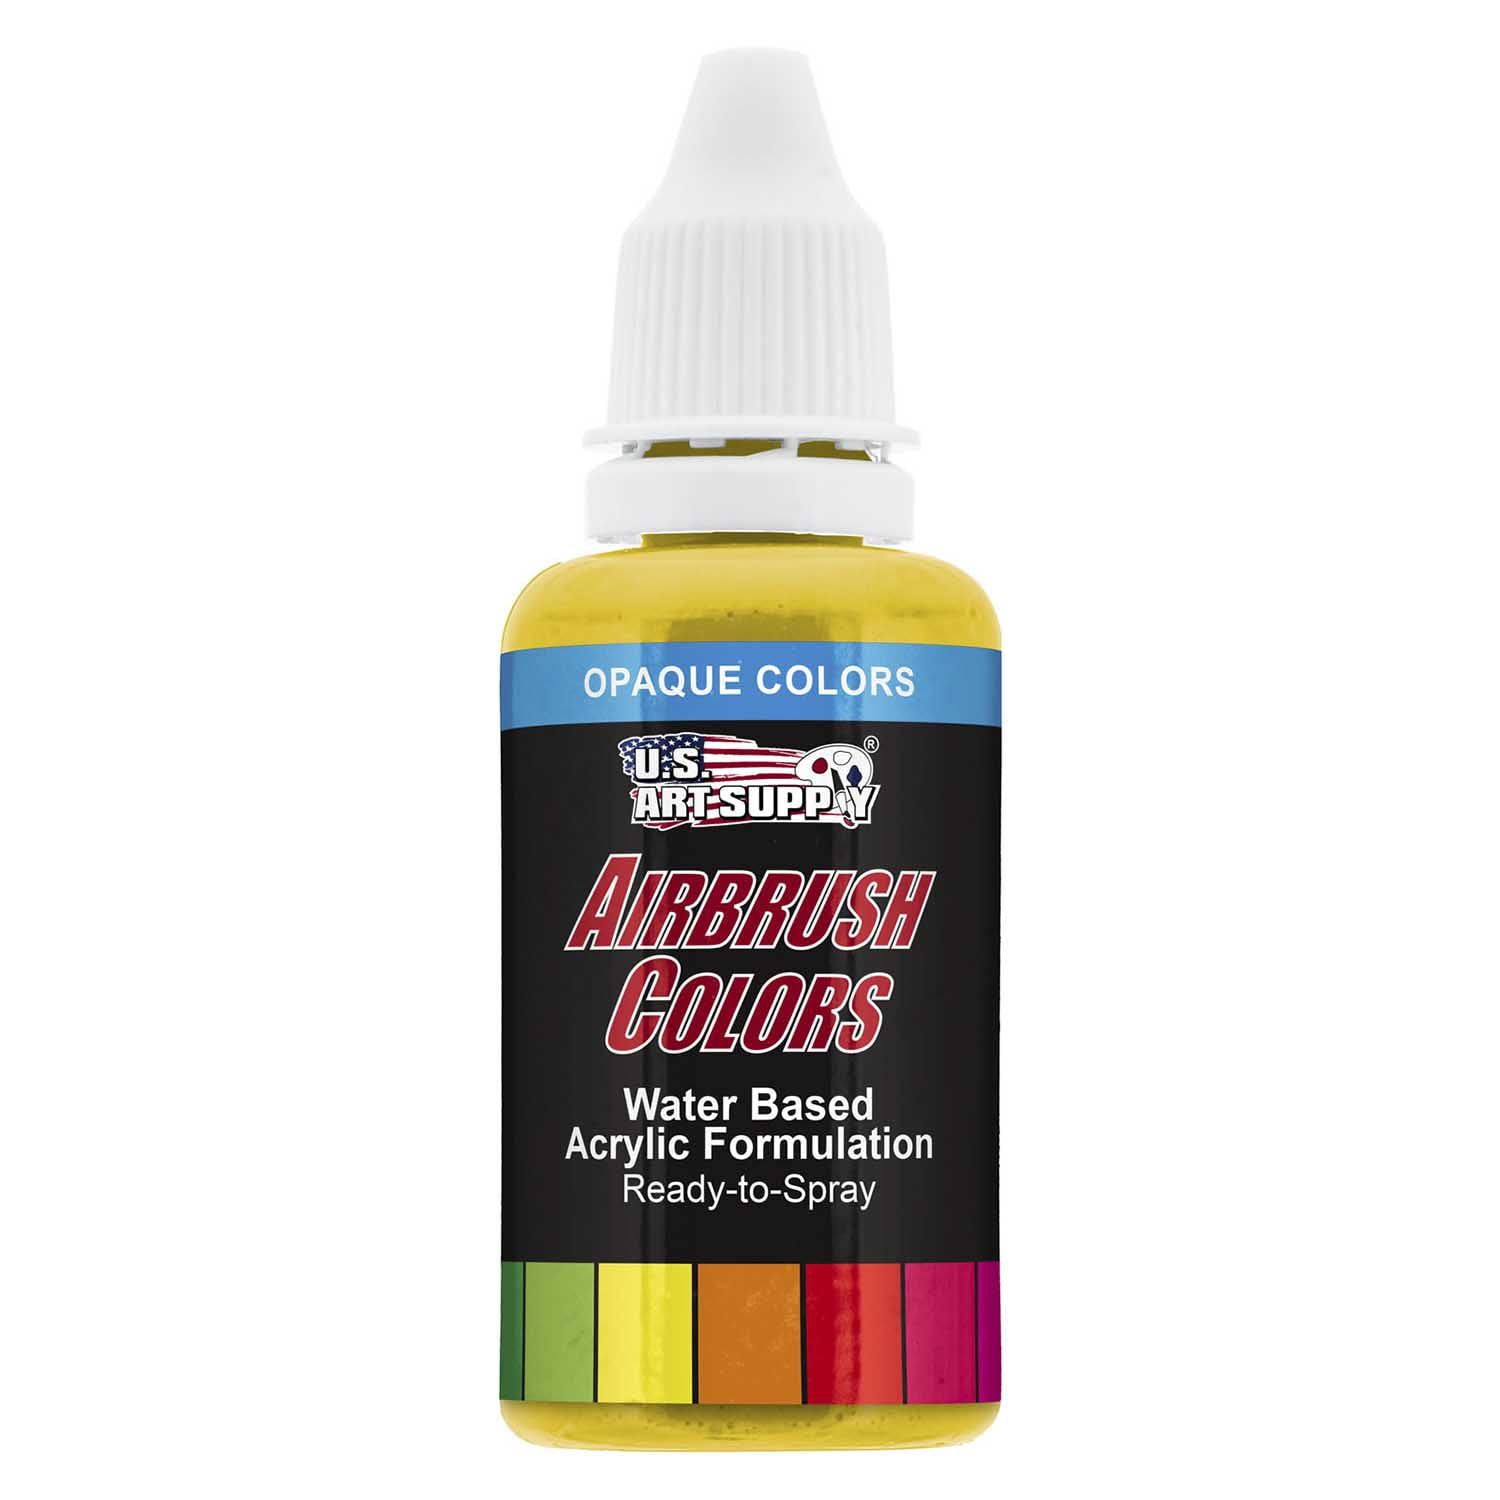 U.S. Art Supply 16-Ounce Pint Airbrush Thinner for Reducing Airbrush Paint  for All Acrylic Paints - Extender Base, Reducer to Thin Colors Improve Flow  - Works for Thinning Acrylic Pouring Paint 